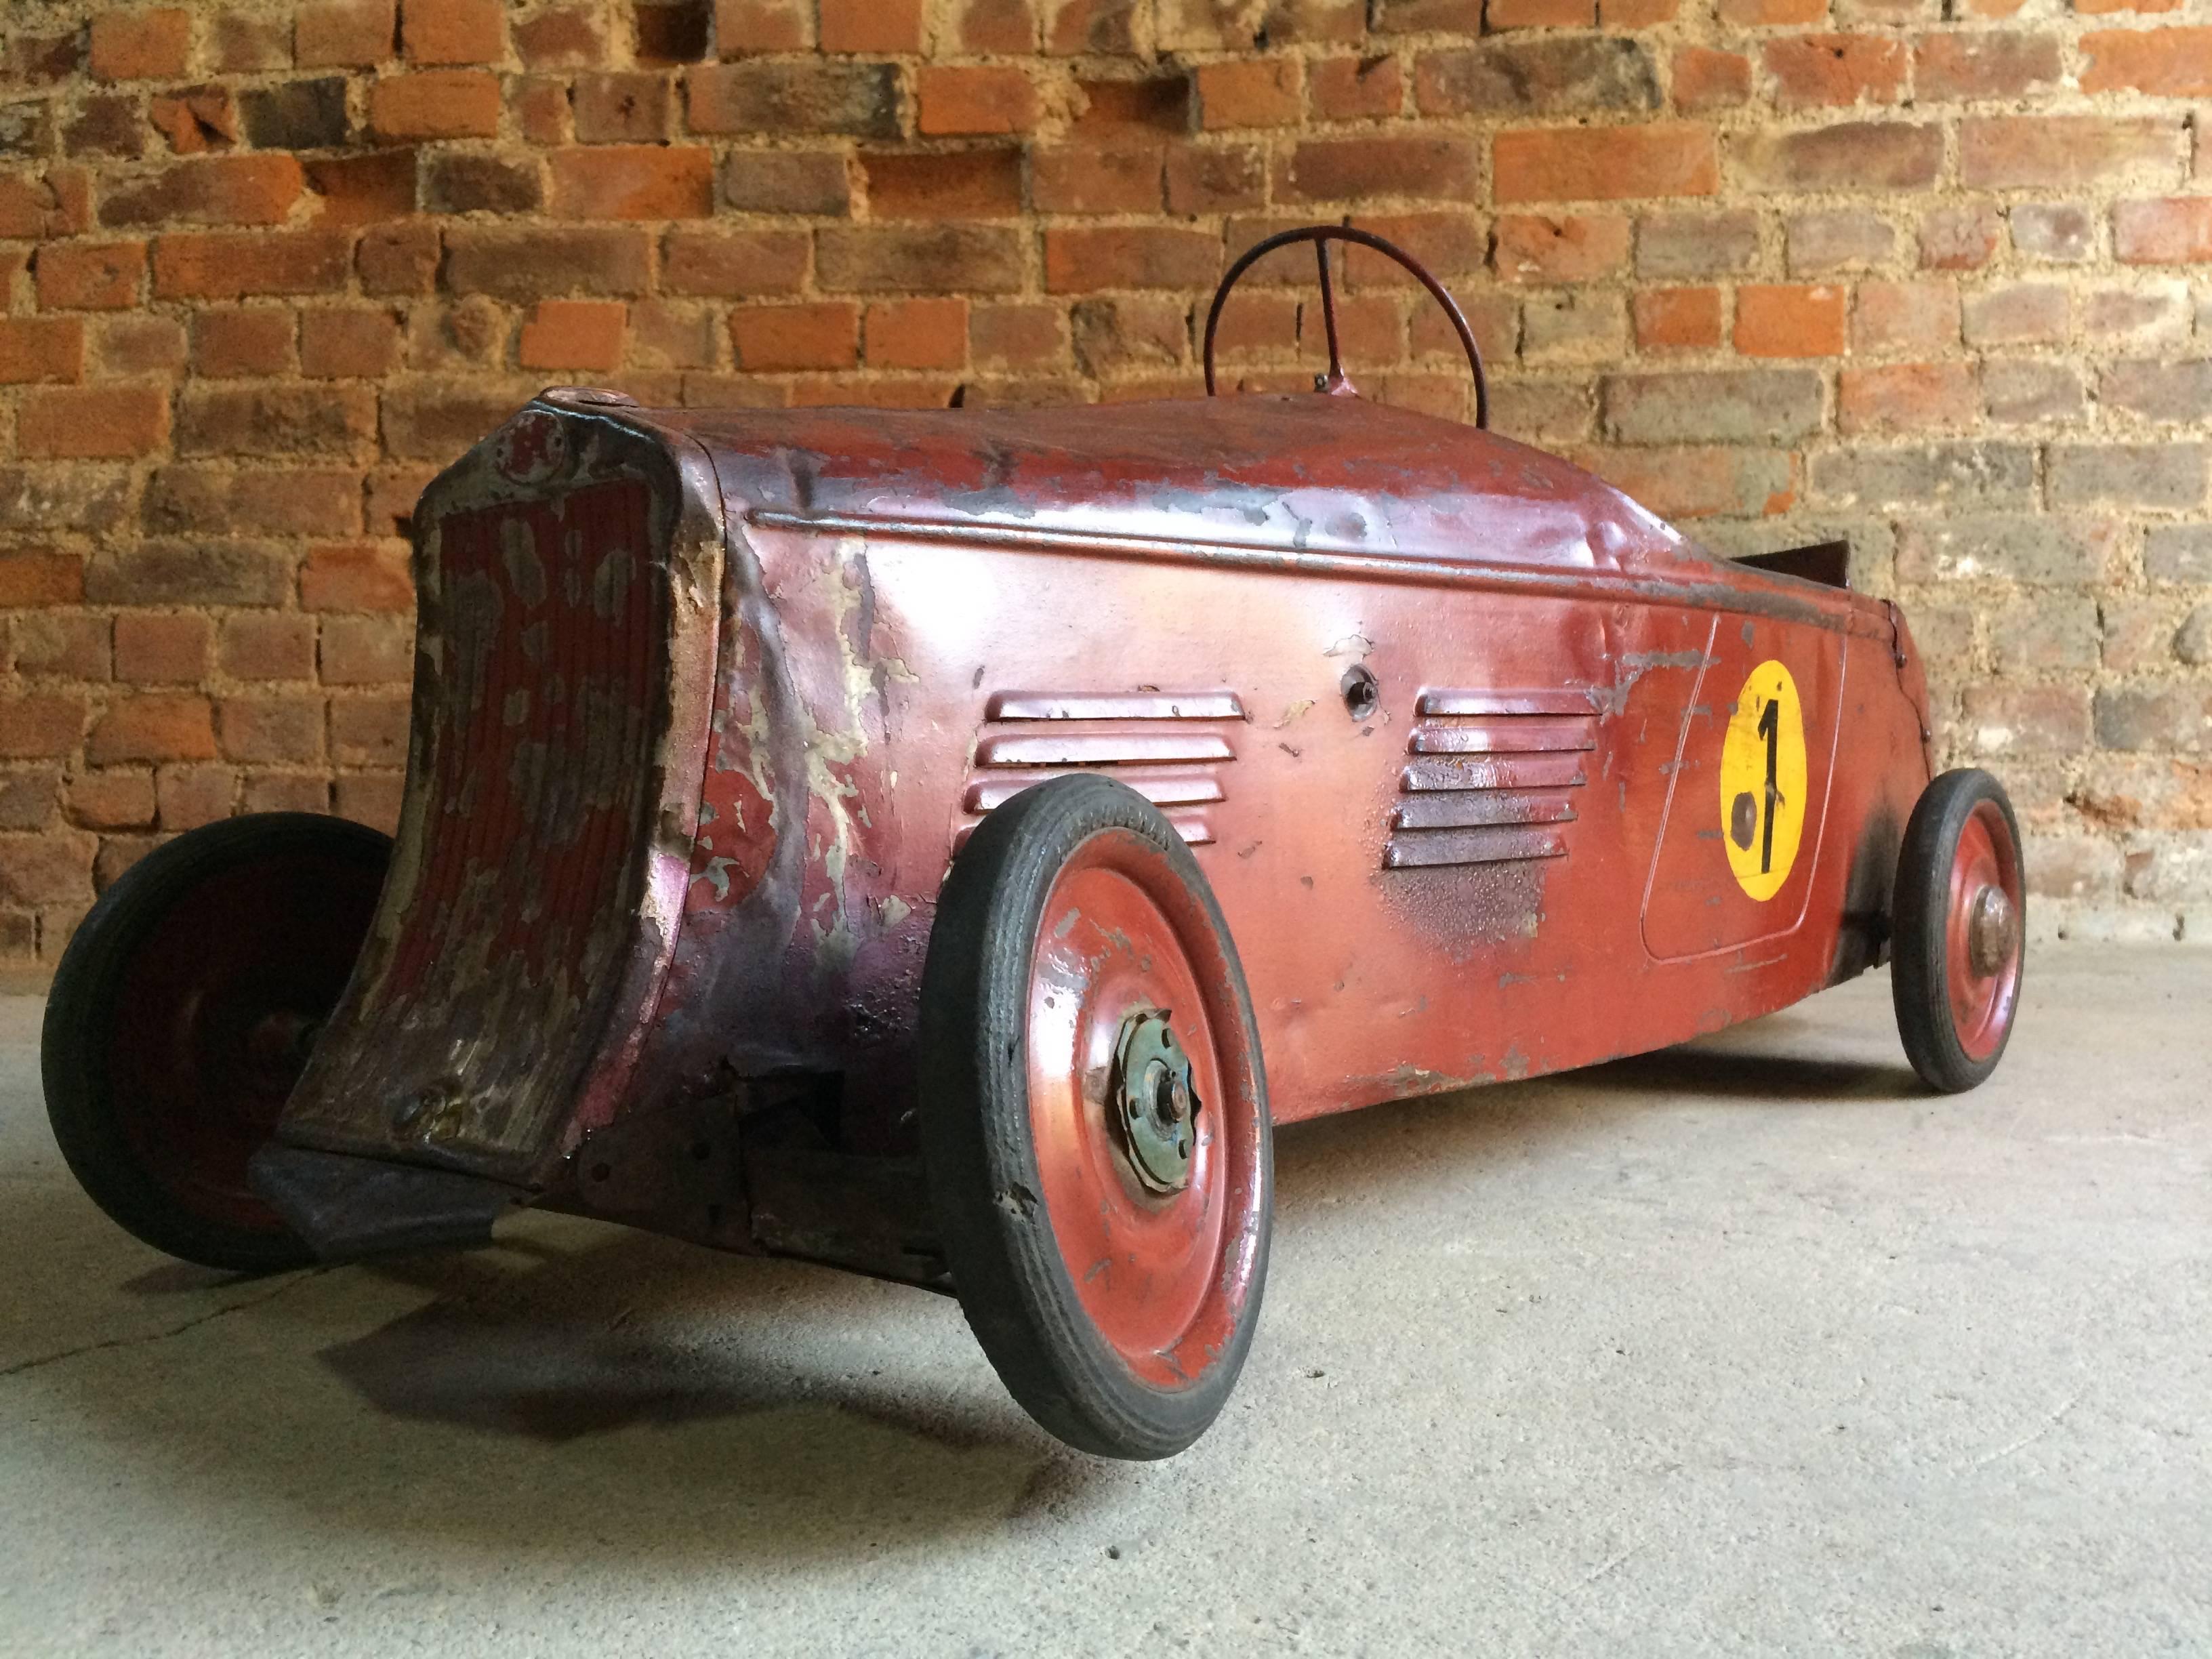 Fabulous vintage French Delage 'Boat Tail' racer pedal car, circa 1935, extremely rare and beautifully patinated, manufactured in France by Eureka, ideal for that loft space wall.

Dimensions:

Height 14” inches

Width 14” inches

Length 50”